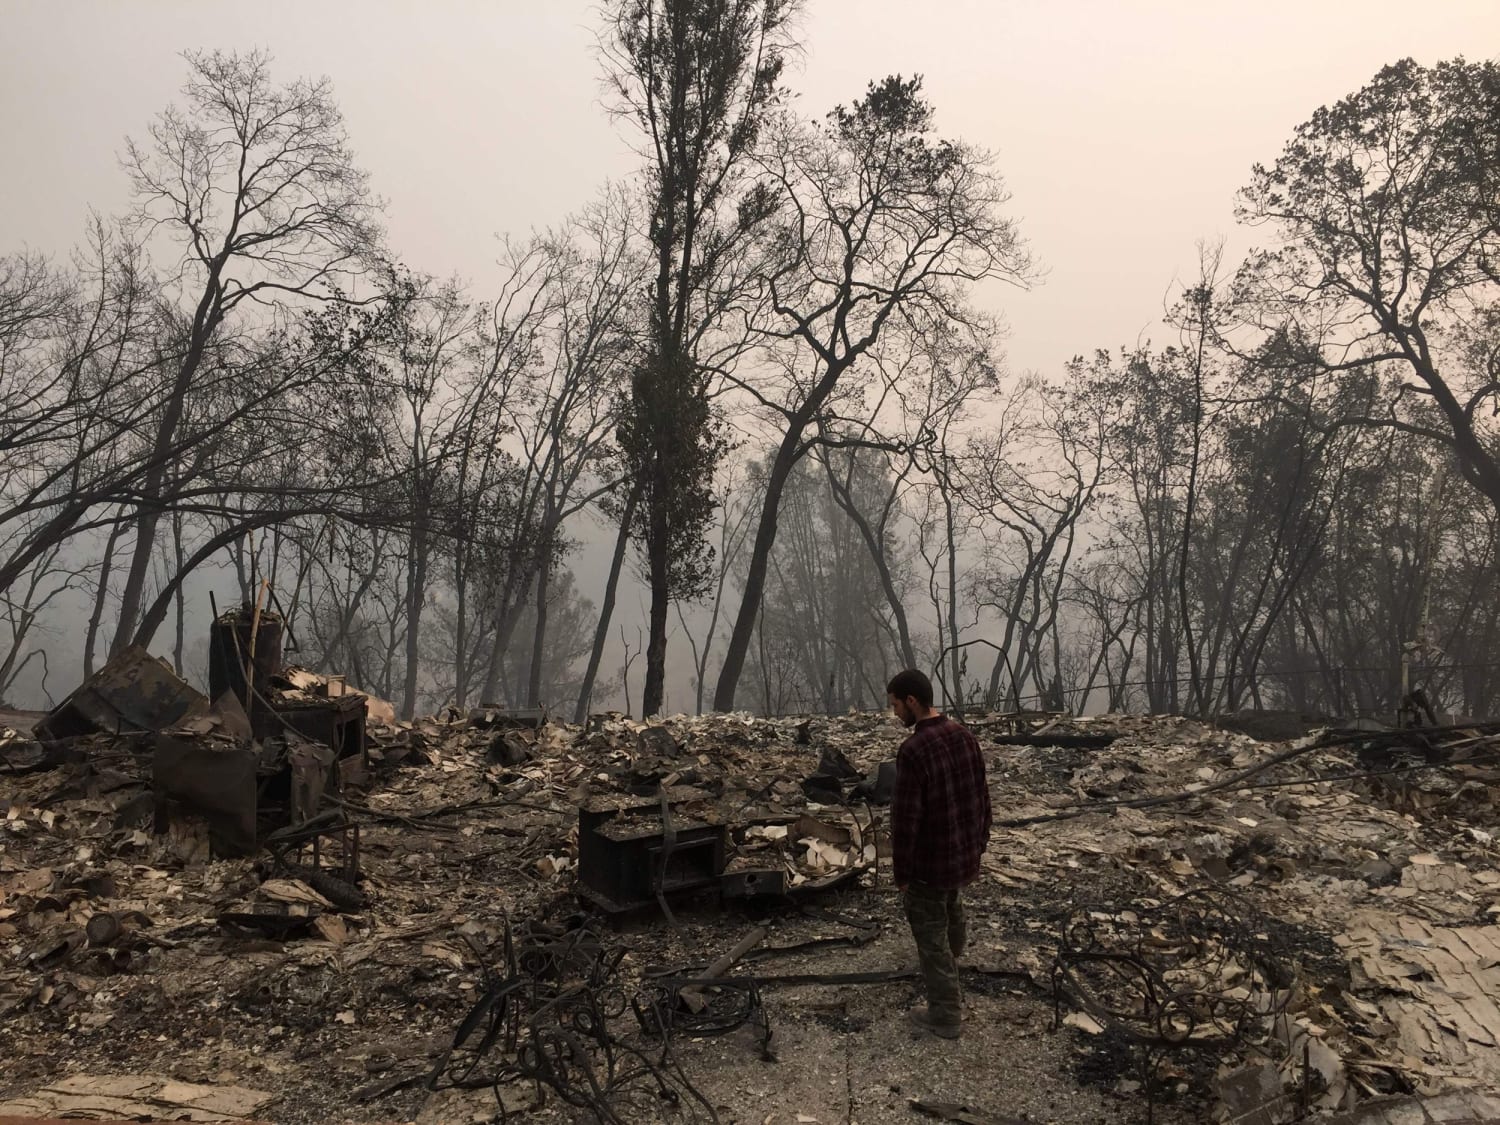 How are people supposed to rebuild Paradise, California, when nobody can  afford home insurance?